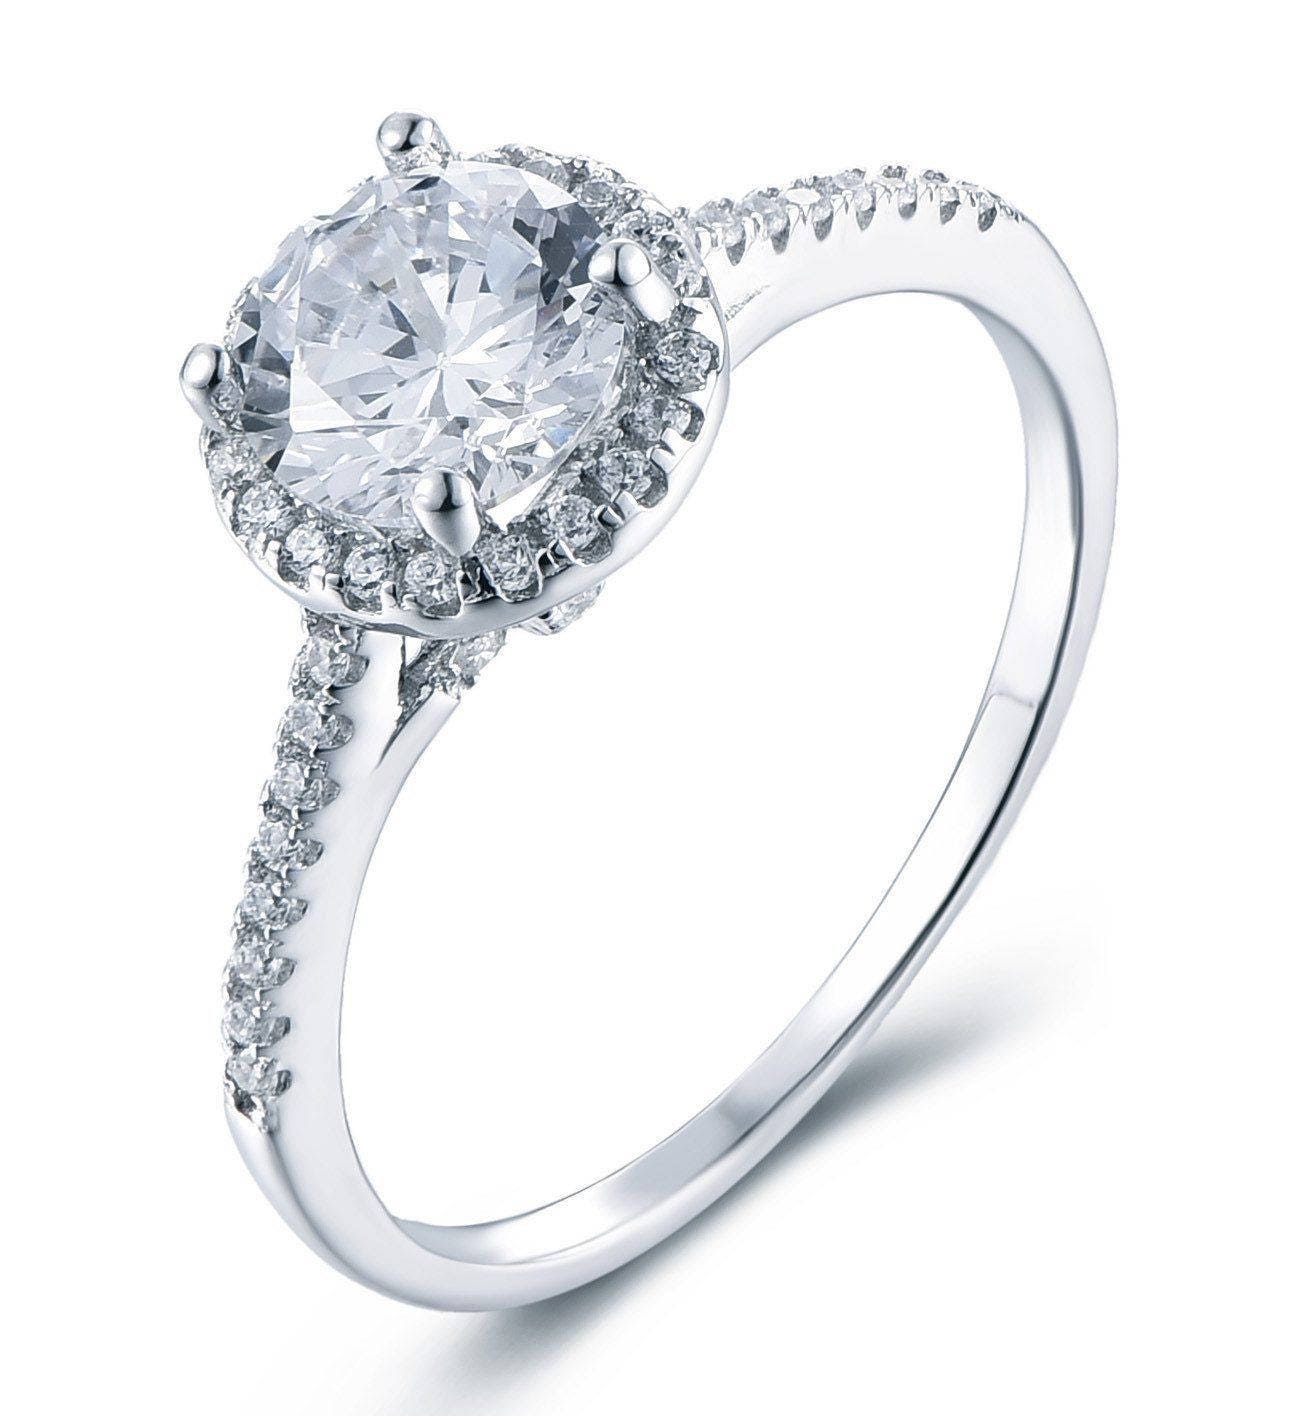 Details about   Round Cut 2.65 ct White Diamond Halo Engagement Ring Sterling Silver Ring HYt26 